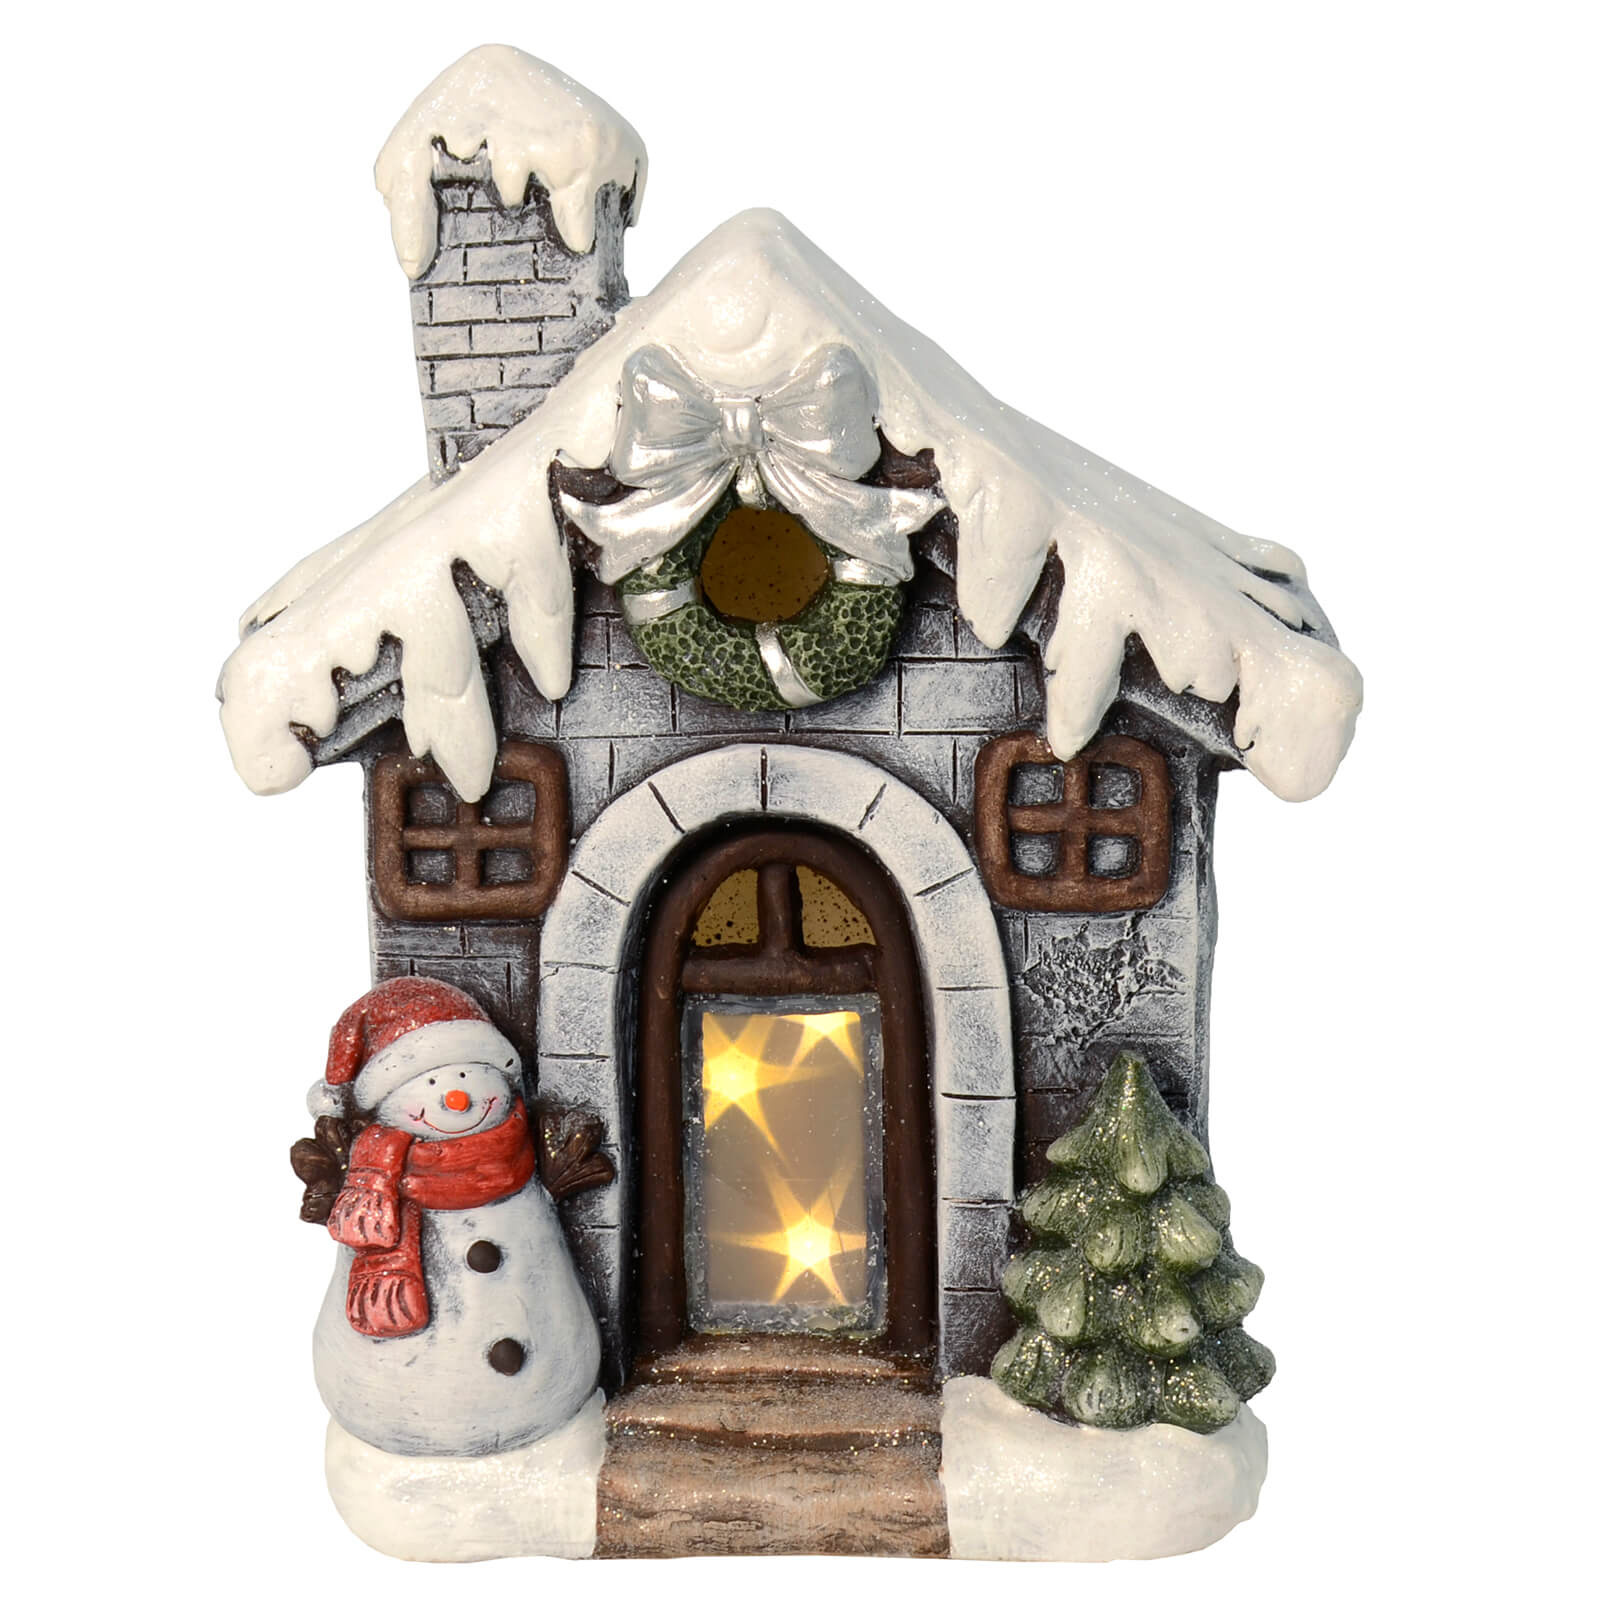 Christmas ornament with snowman and tree outside a snow covered house with wreath, silver ribbon and light up LED stars in the doorway